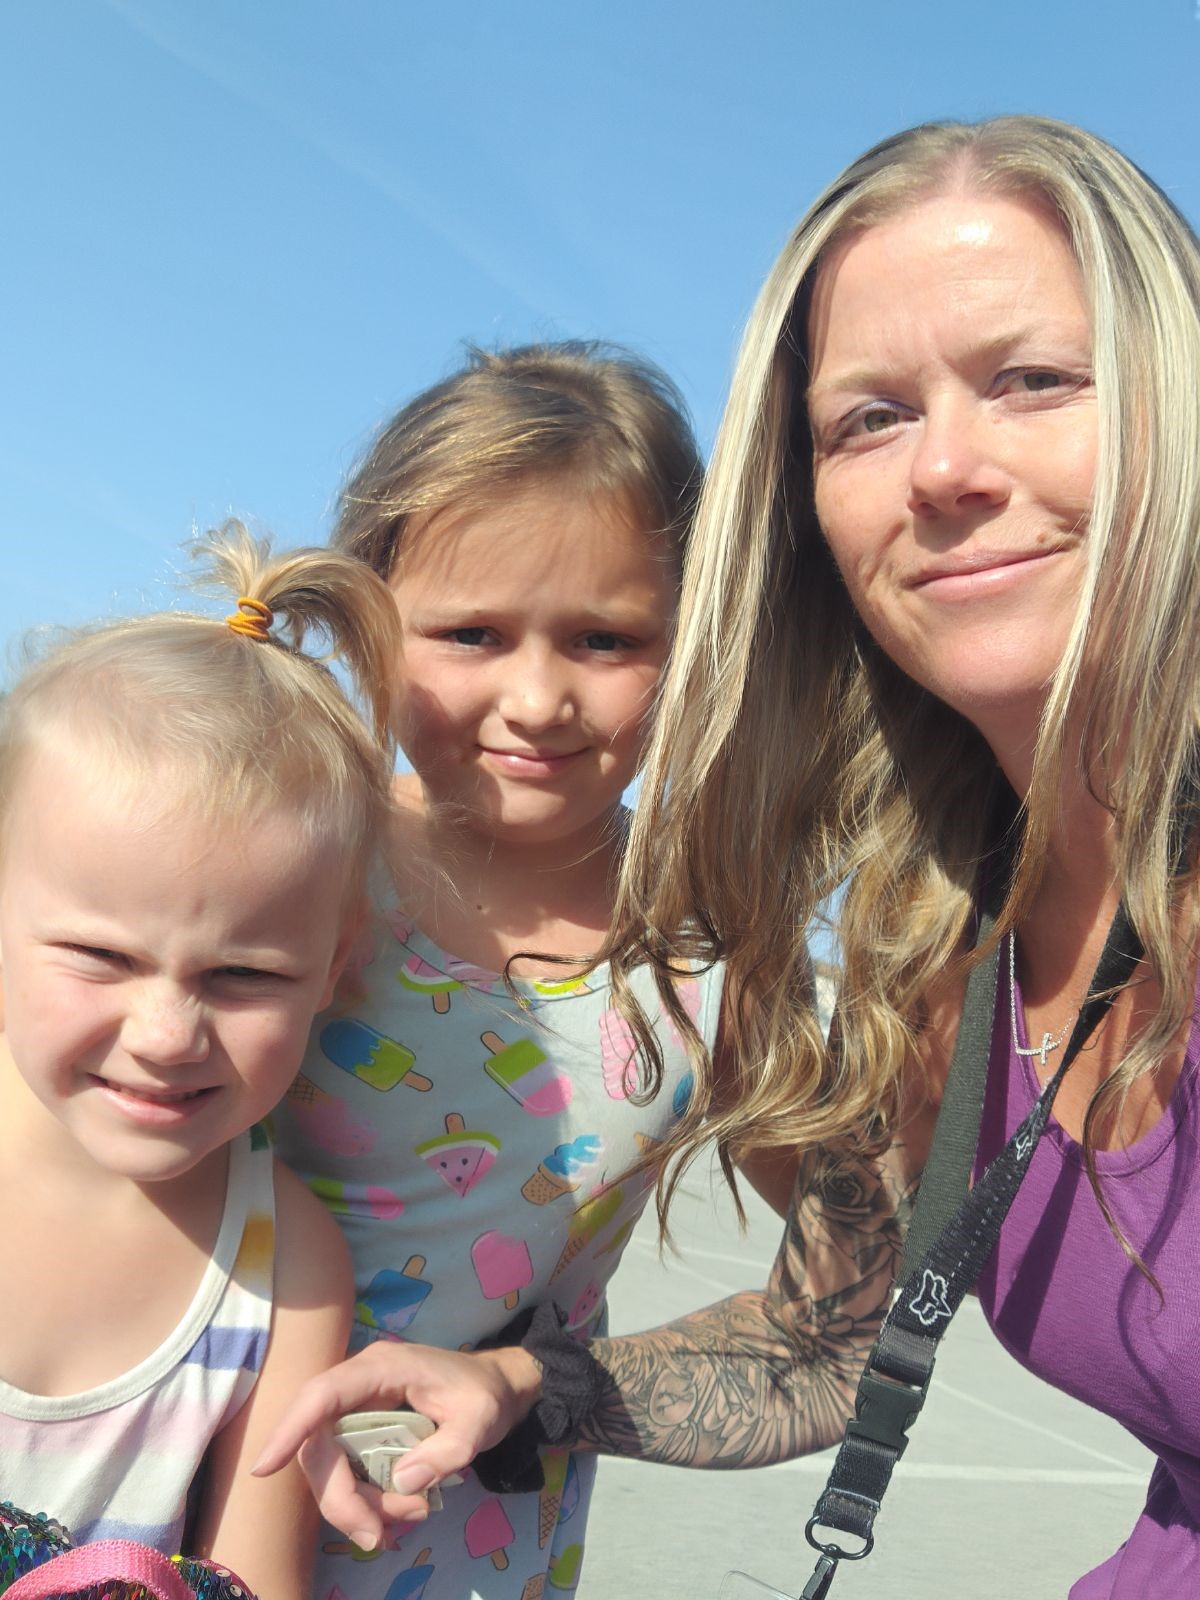 A woman with blonde hair and wearing a purple top takes a photo with a blonde child, and blonde  toddler